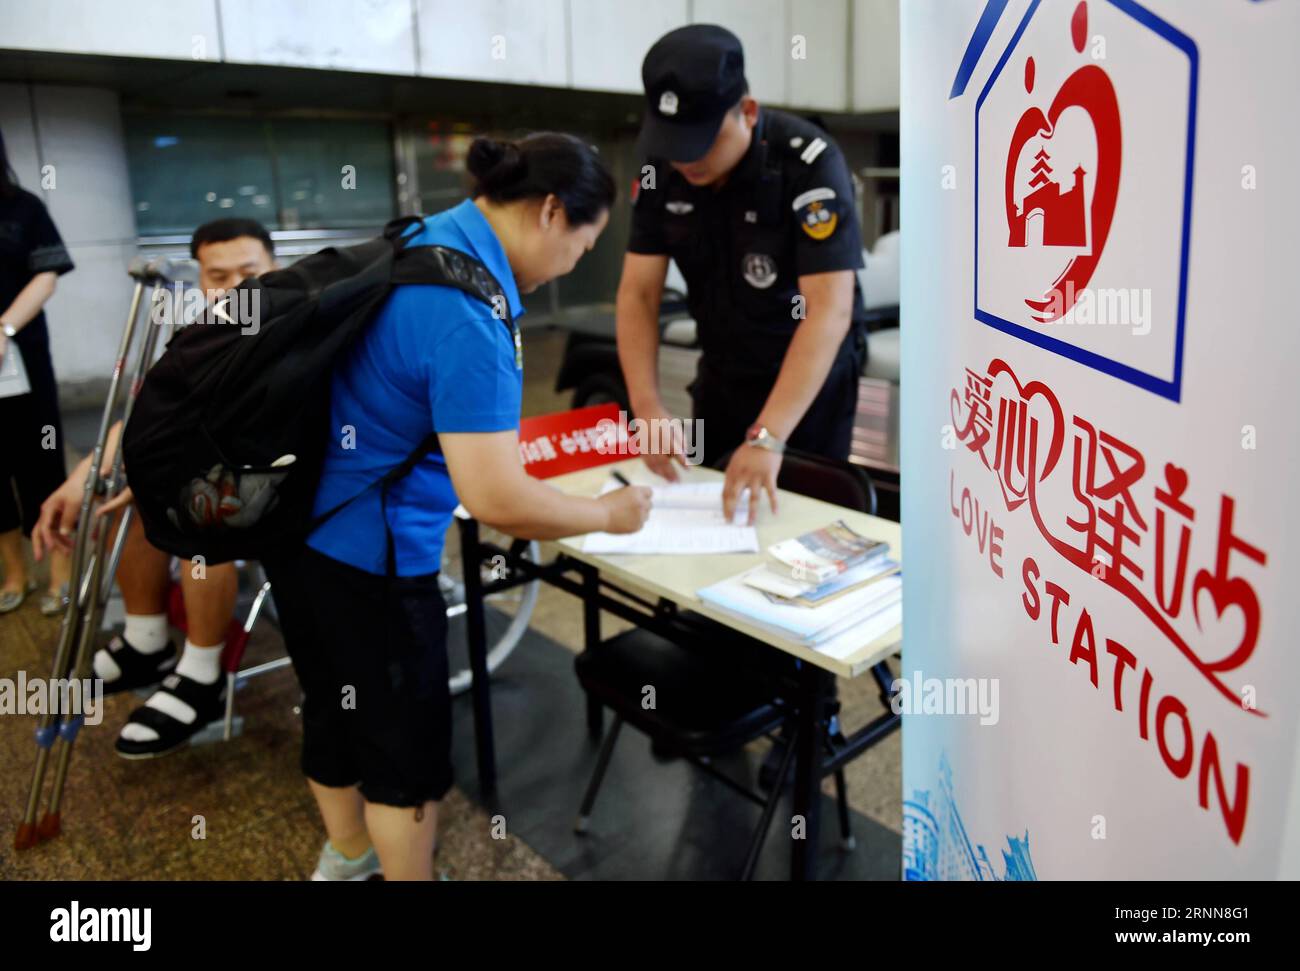 (170701) -- BEIJING, July 1, 2017 -- Staffs provide services at Beijing West Railway Station in Beijing, capital of China, July 1, 2017. China s summer travel peak started and China s railway network got ready as some 598 million trips are expected. )(wsw) CHINA-BEIJING-SUMMER VACATION-RAILWAY TRAVEL RUSH (CN) ZhangxZhenlin PUBLICATIONxNOTxINxCHN   Beijing July 1 2017 staffs provide Services AT Beijing WEST Railway Station in Beijing Capital of China July 1 2017 China S Summer Travel Peak started and China S Railway Network Got Ready As Some 598 Million Trips are expected WSW China Beijing Sum Stock Photo